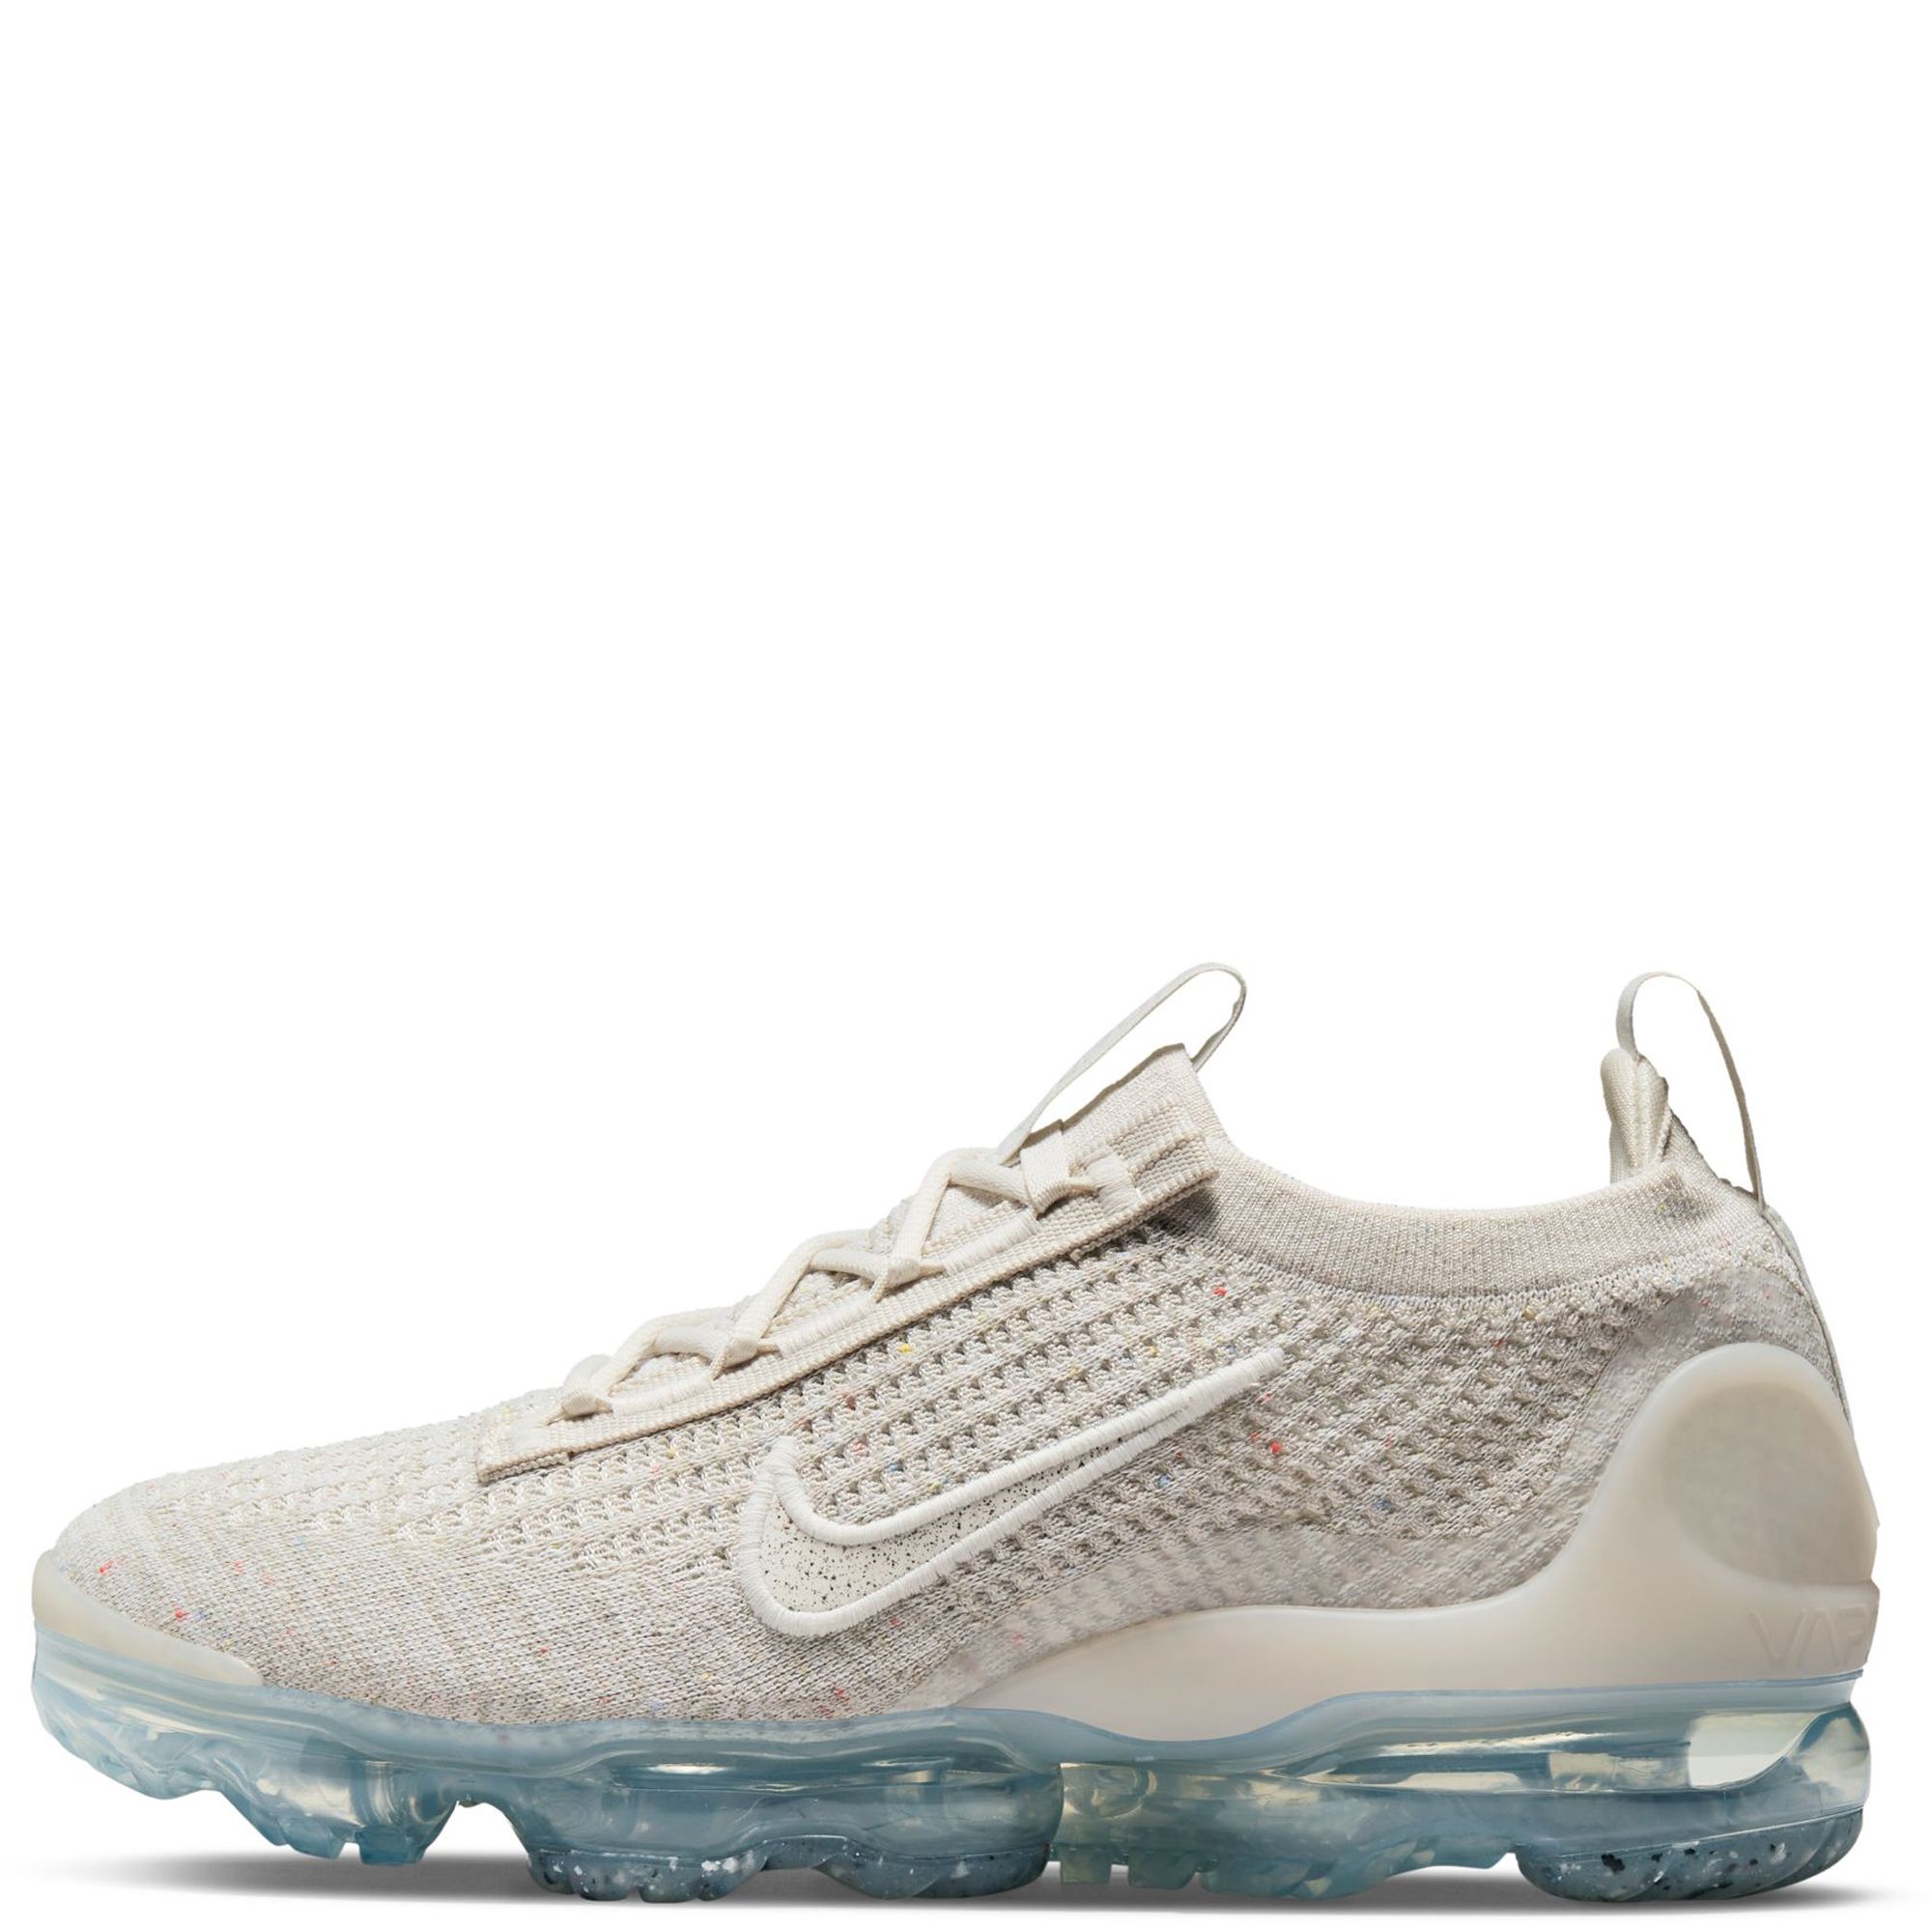 The 10 Air Vapormax Flyknit sneakers